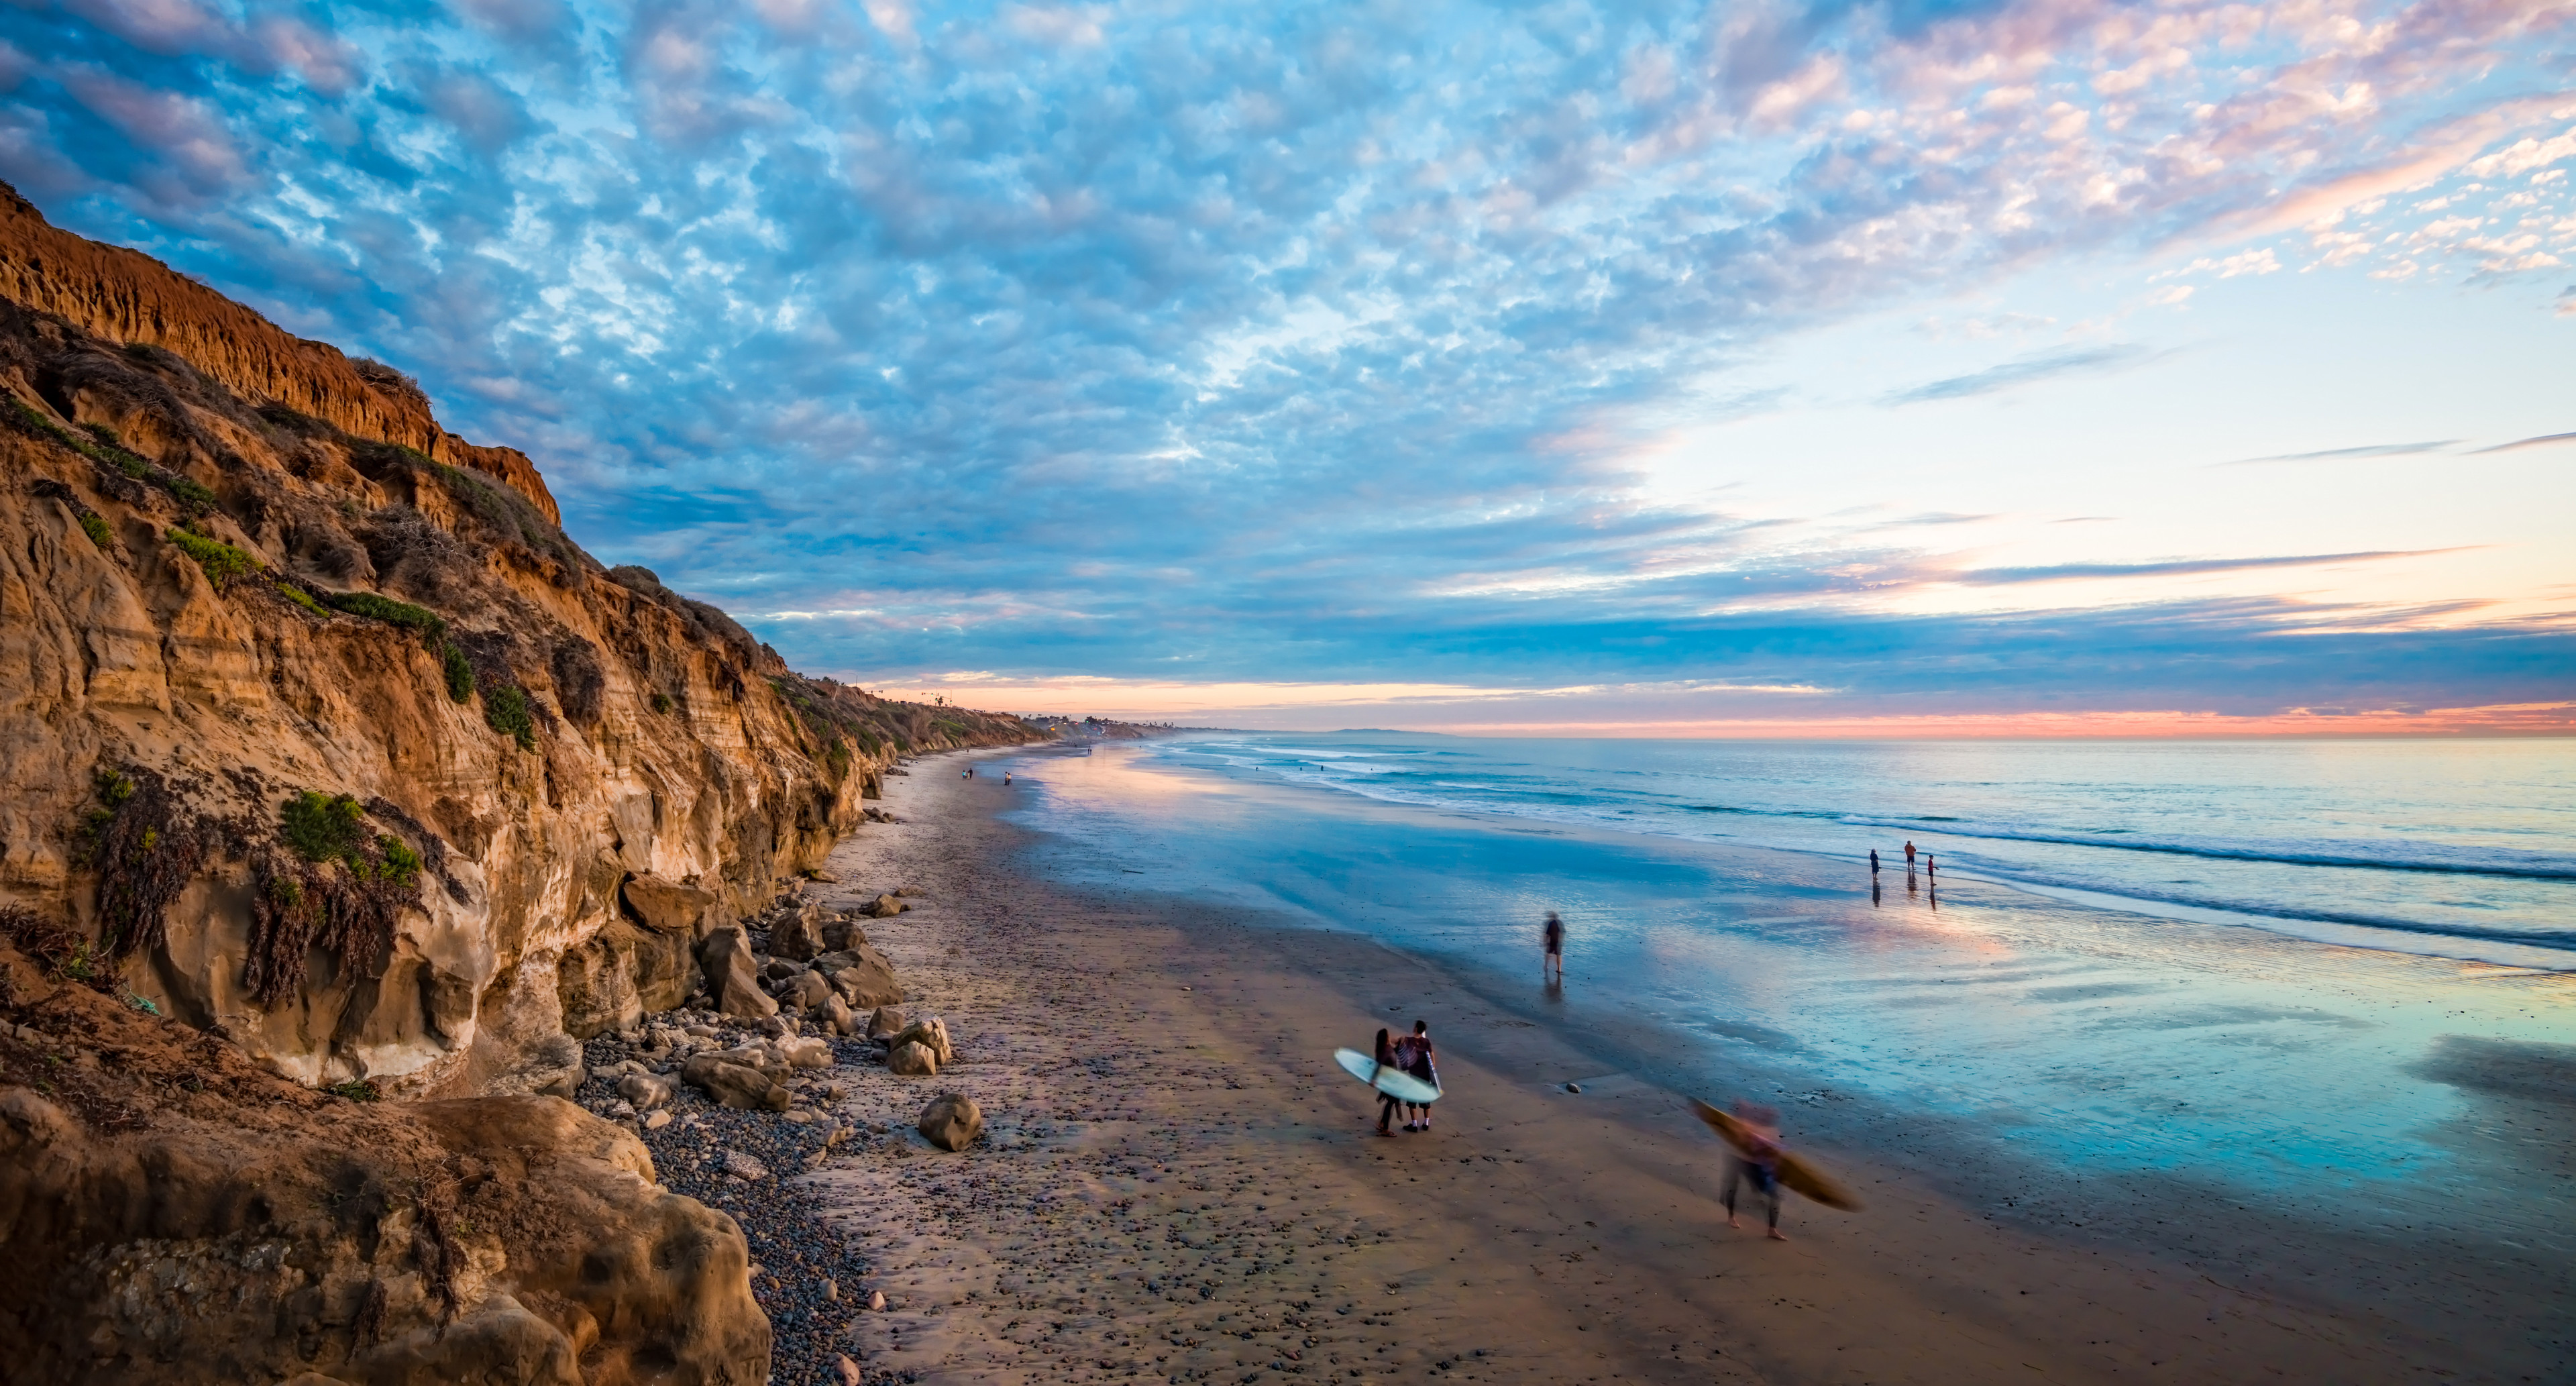 Photo of the beach and sandy cliffs in Carlsbad with surfers walking along the sand in the foreground and a blue, peach, and orange sunset in the background